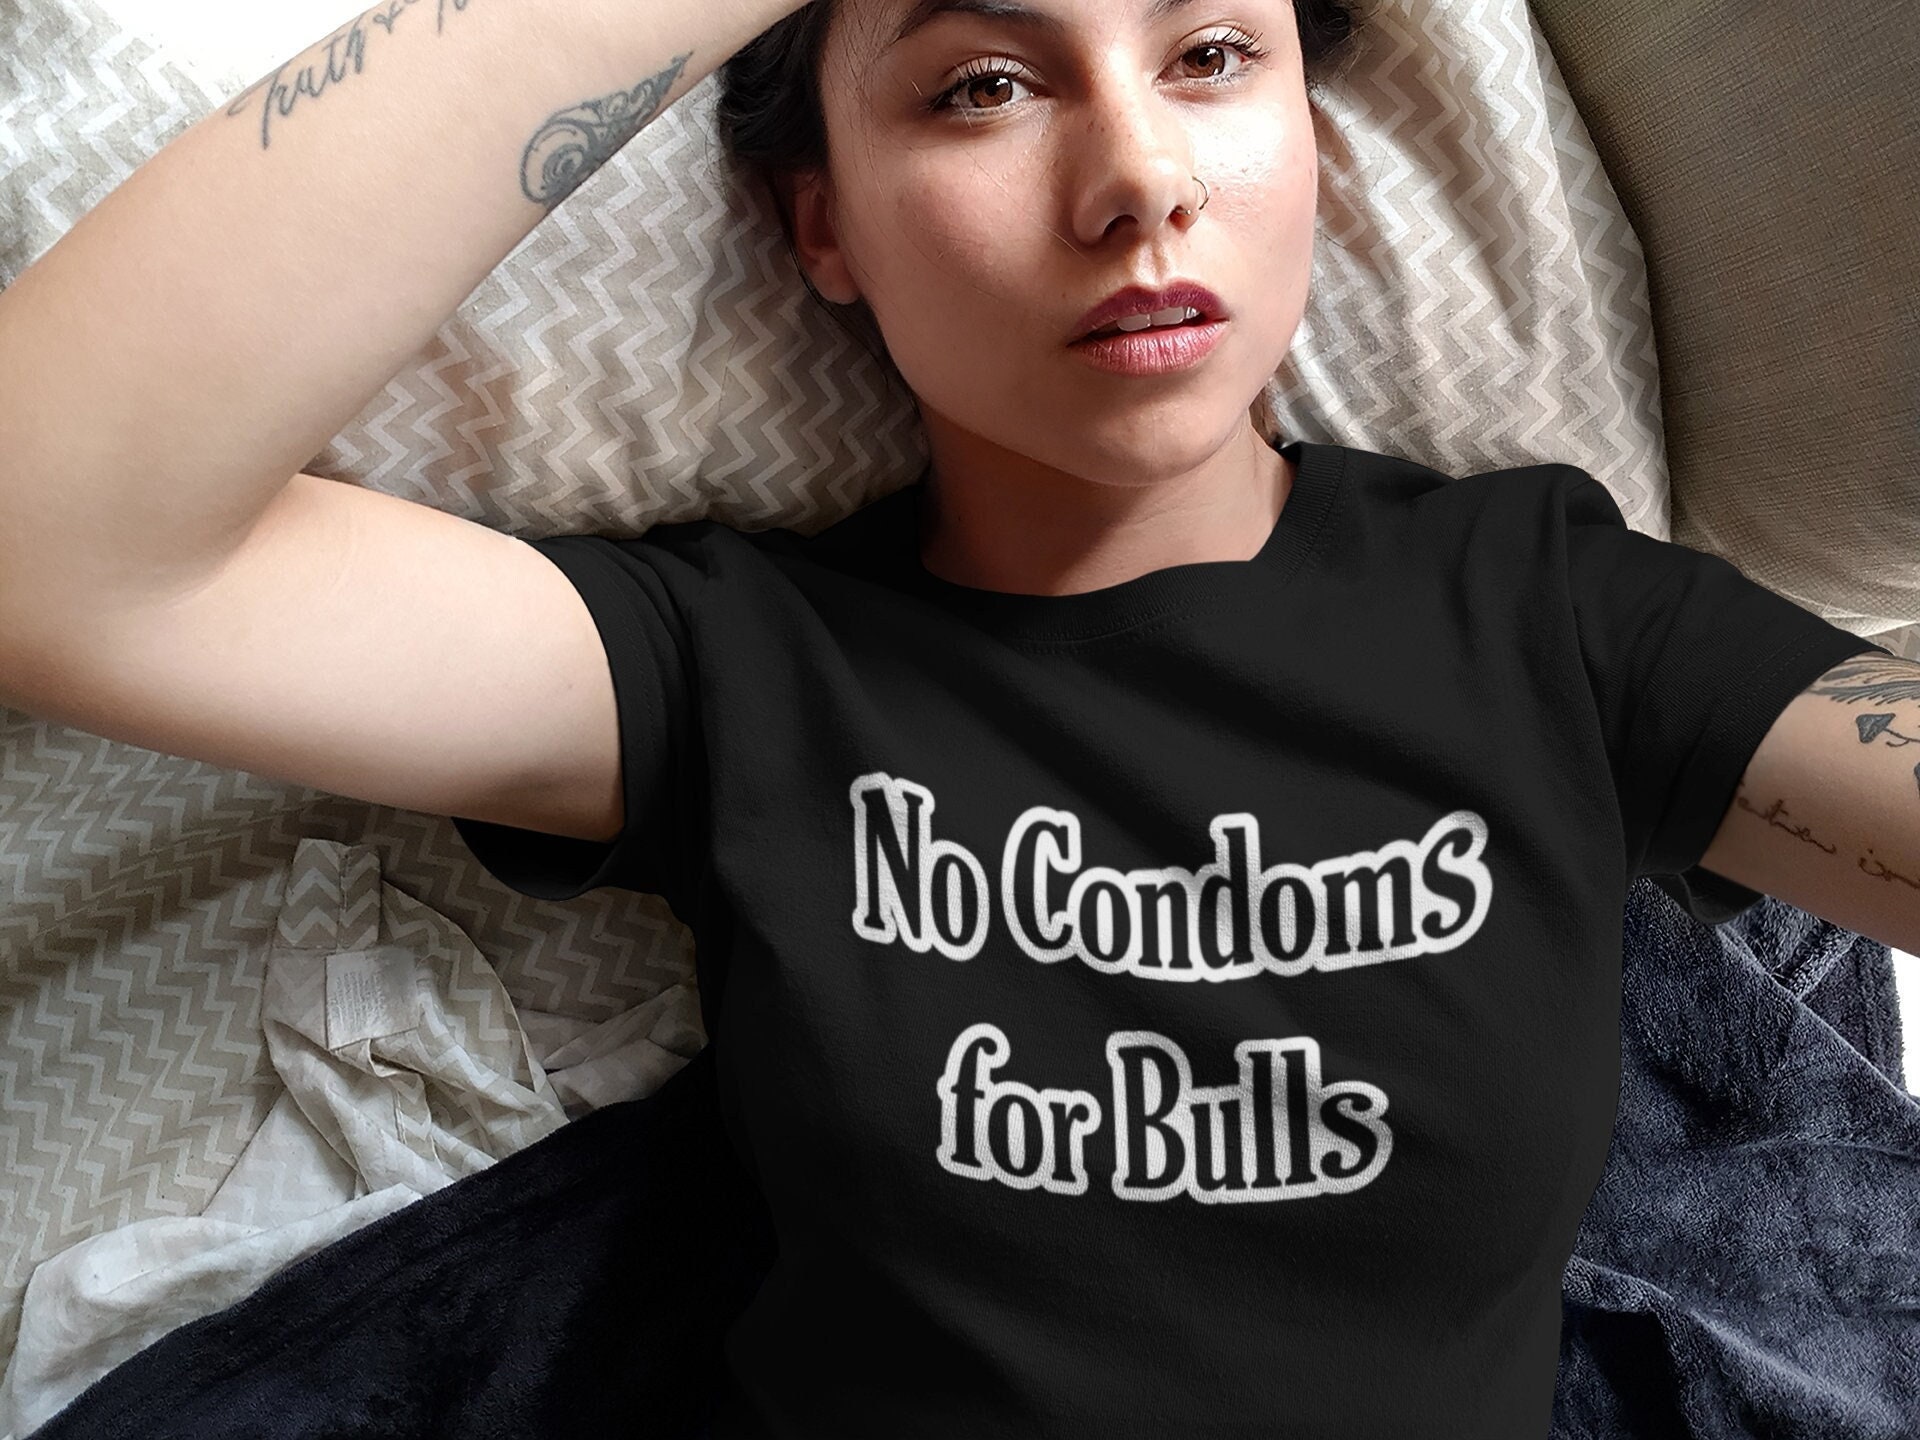 wife and bull no condoms